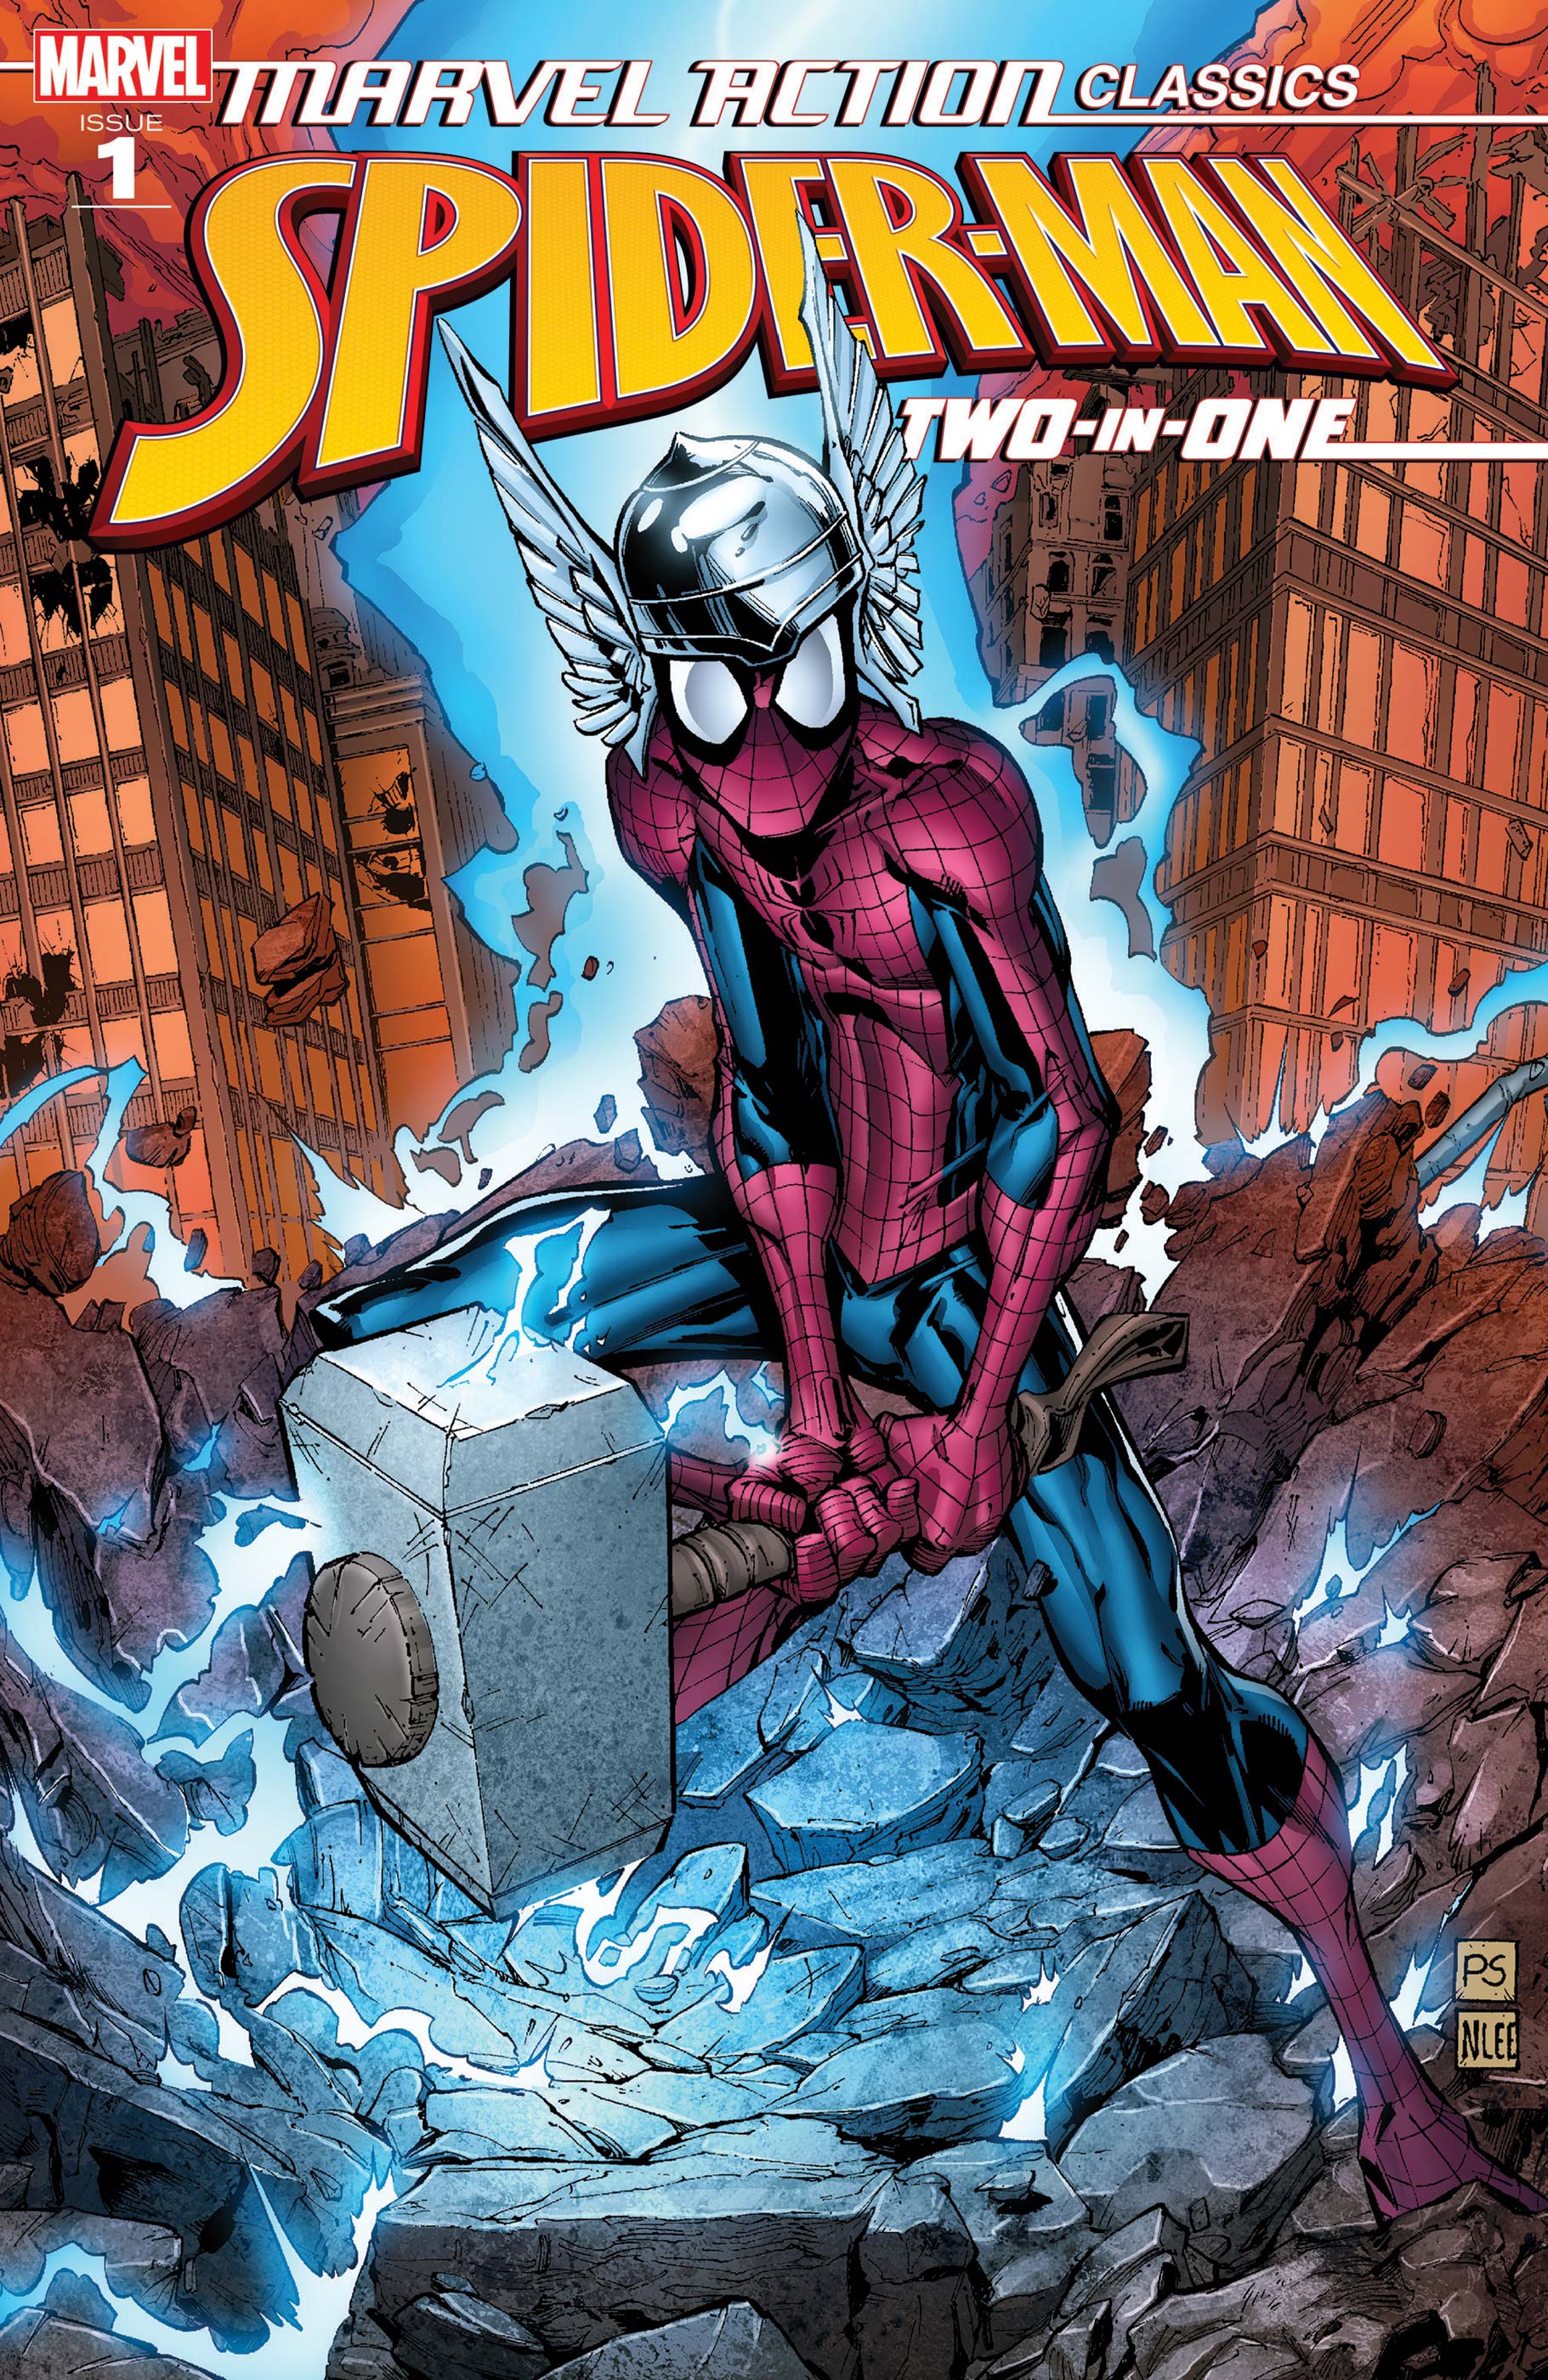 Marvel Action Classics: Spider-Man Two-in-One (2019) #1